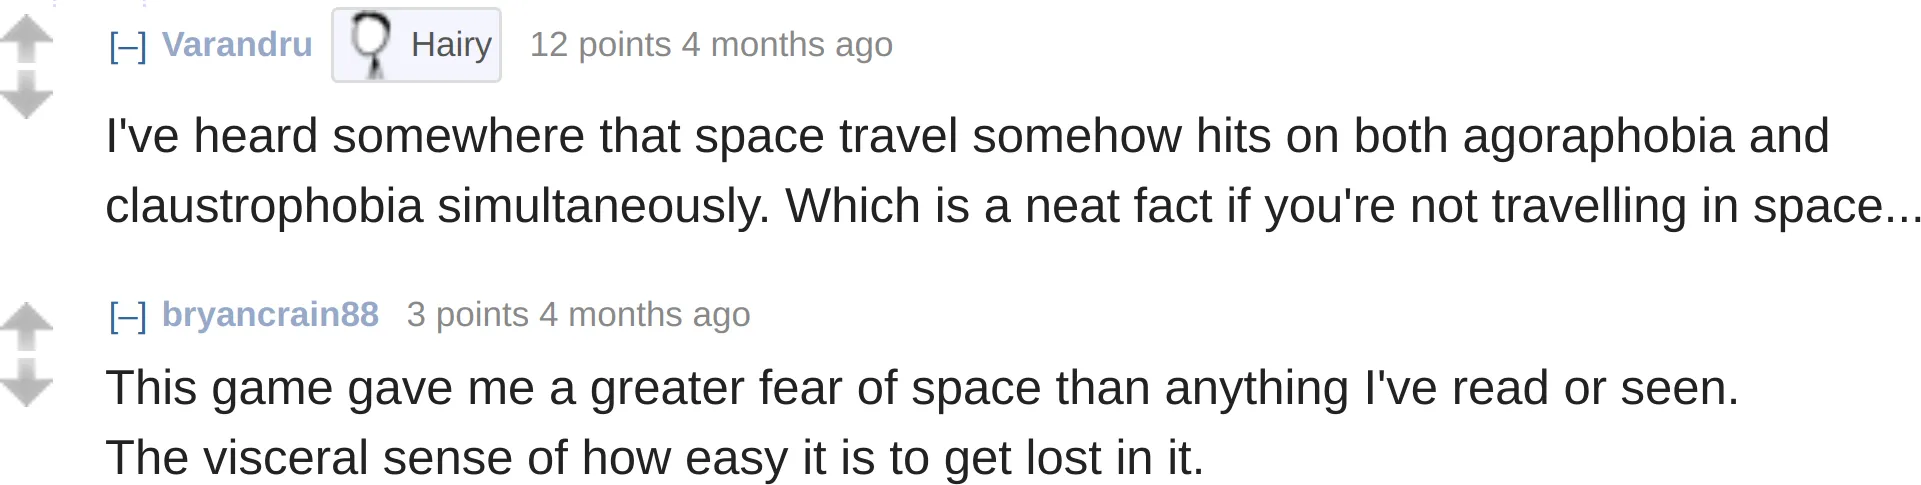 reddit comments on Escape Speed:
Varandru: "I've heard somewhere that space travel somehow hits on both agoraphobia and claustrophobia simultaneously. Which is a neat fact if you're not travelling in space..."
bryancrain88: "This game gave me a greater fear of space than anything I've read or seen. The visceral sense of how easy it is to get lost in it."